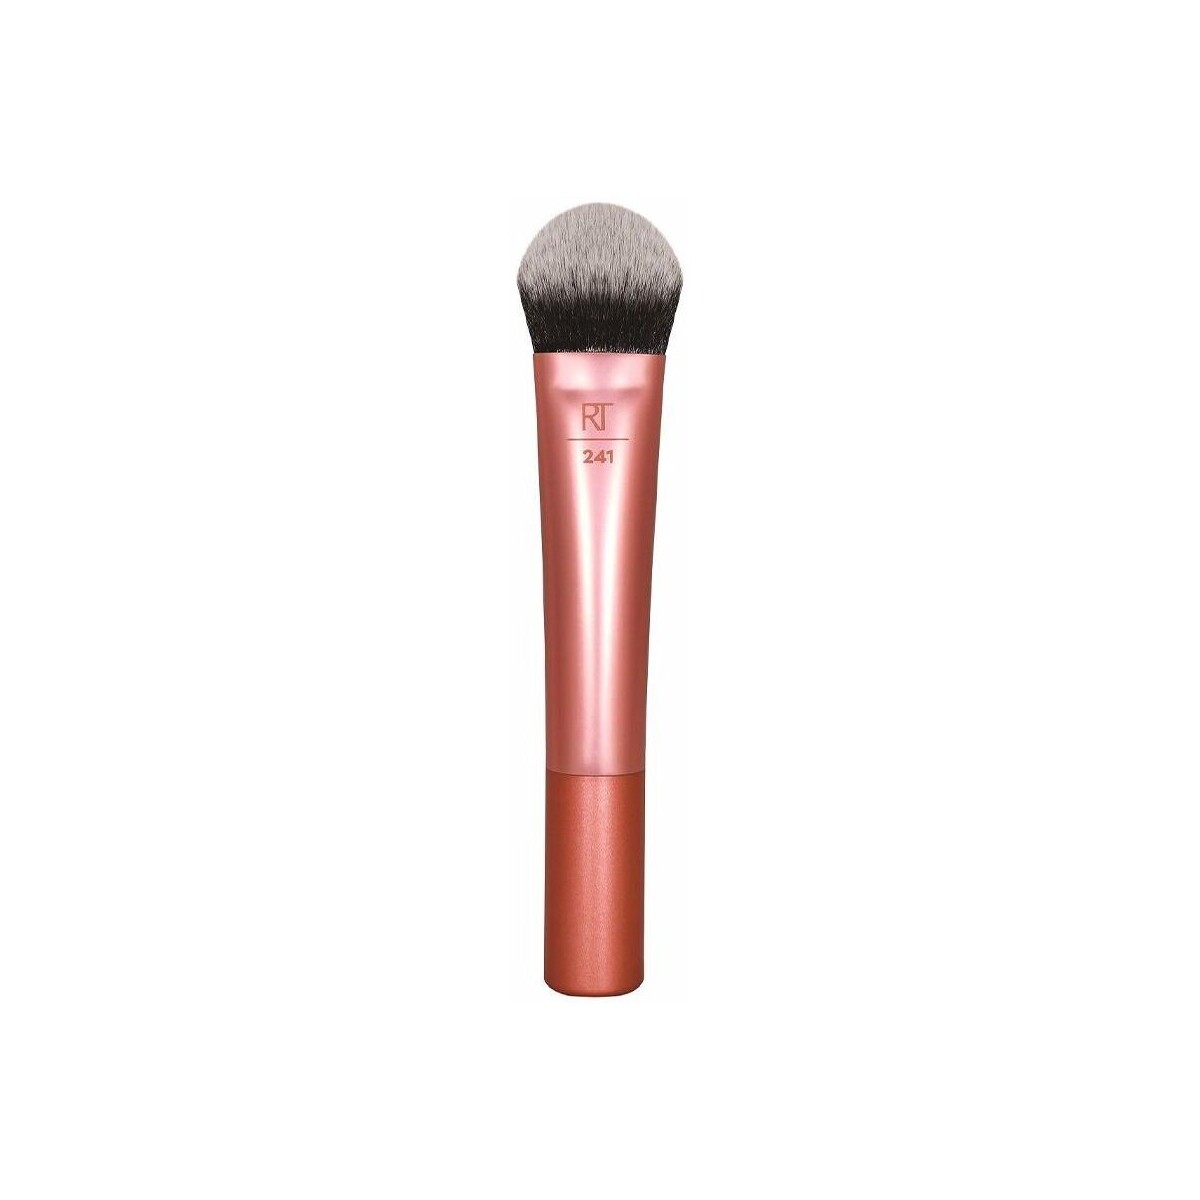 Bellezza Pennelli Real Techniques Tapered Foundation For Foundation Brush 